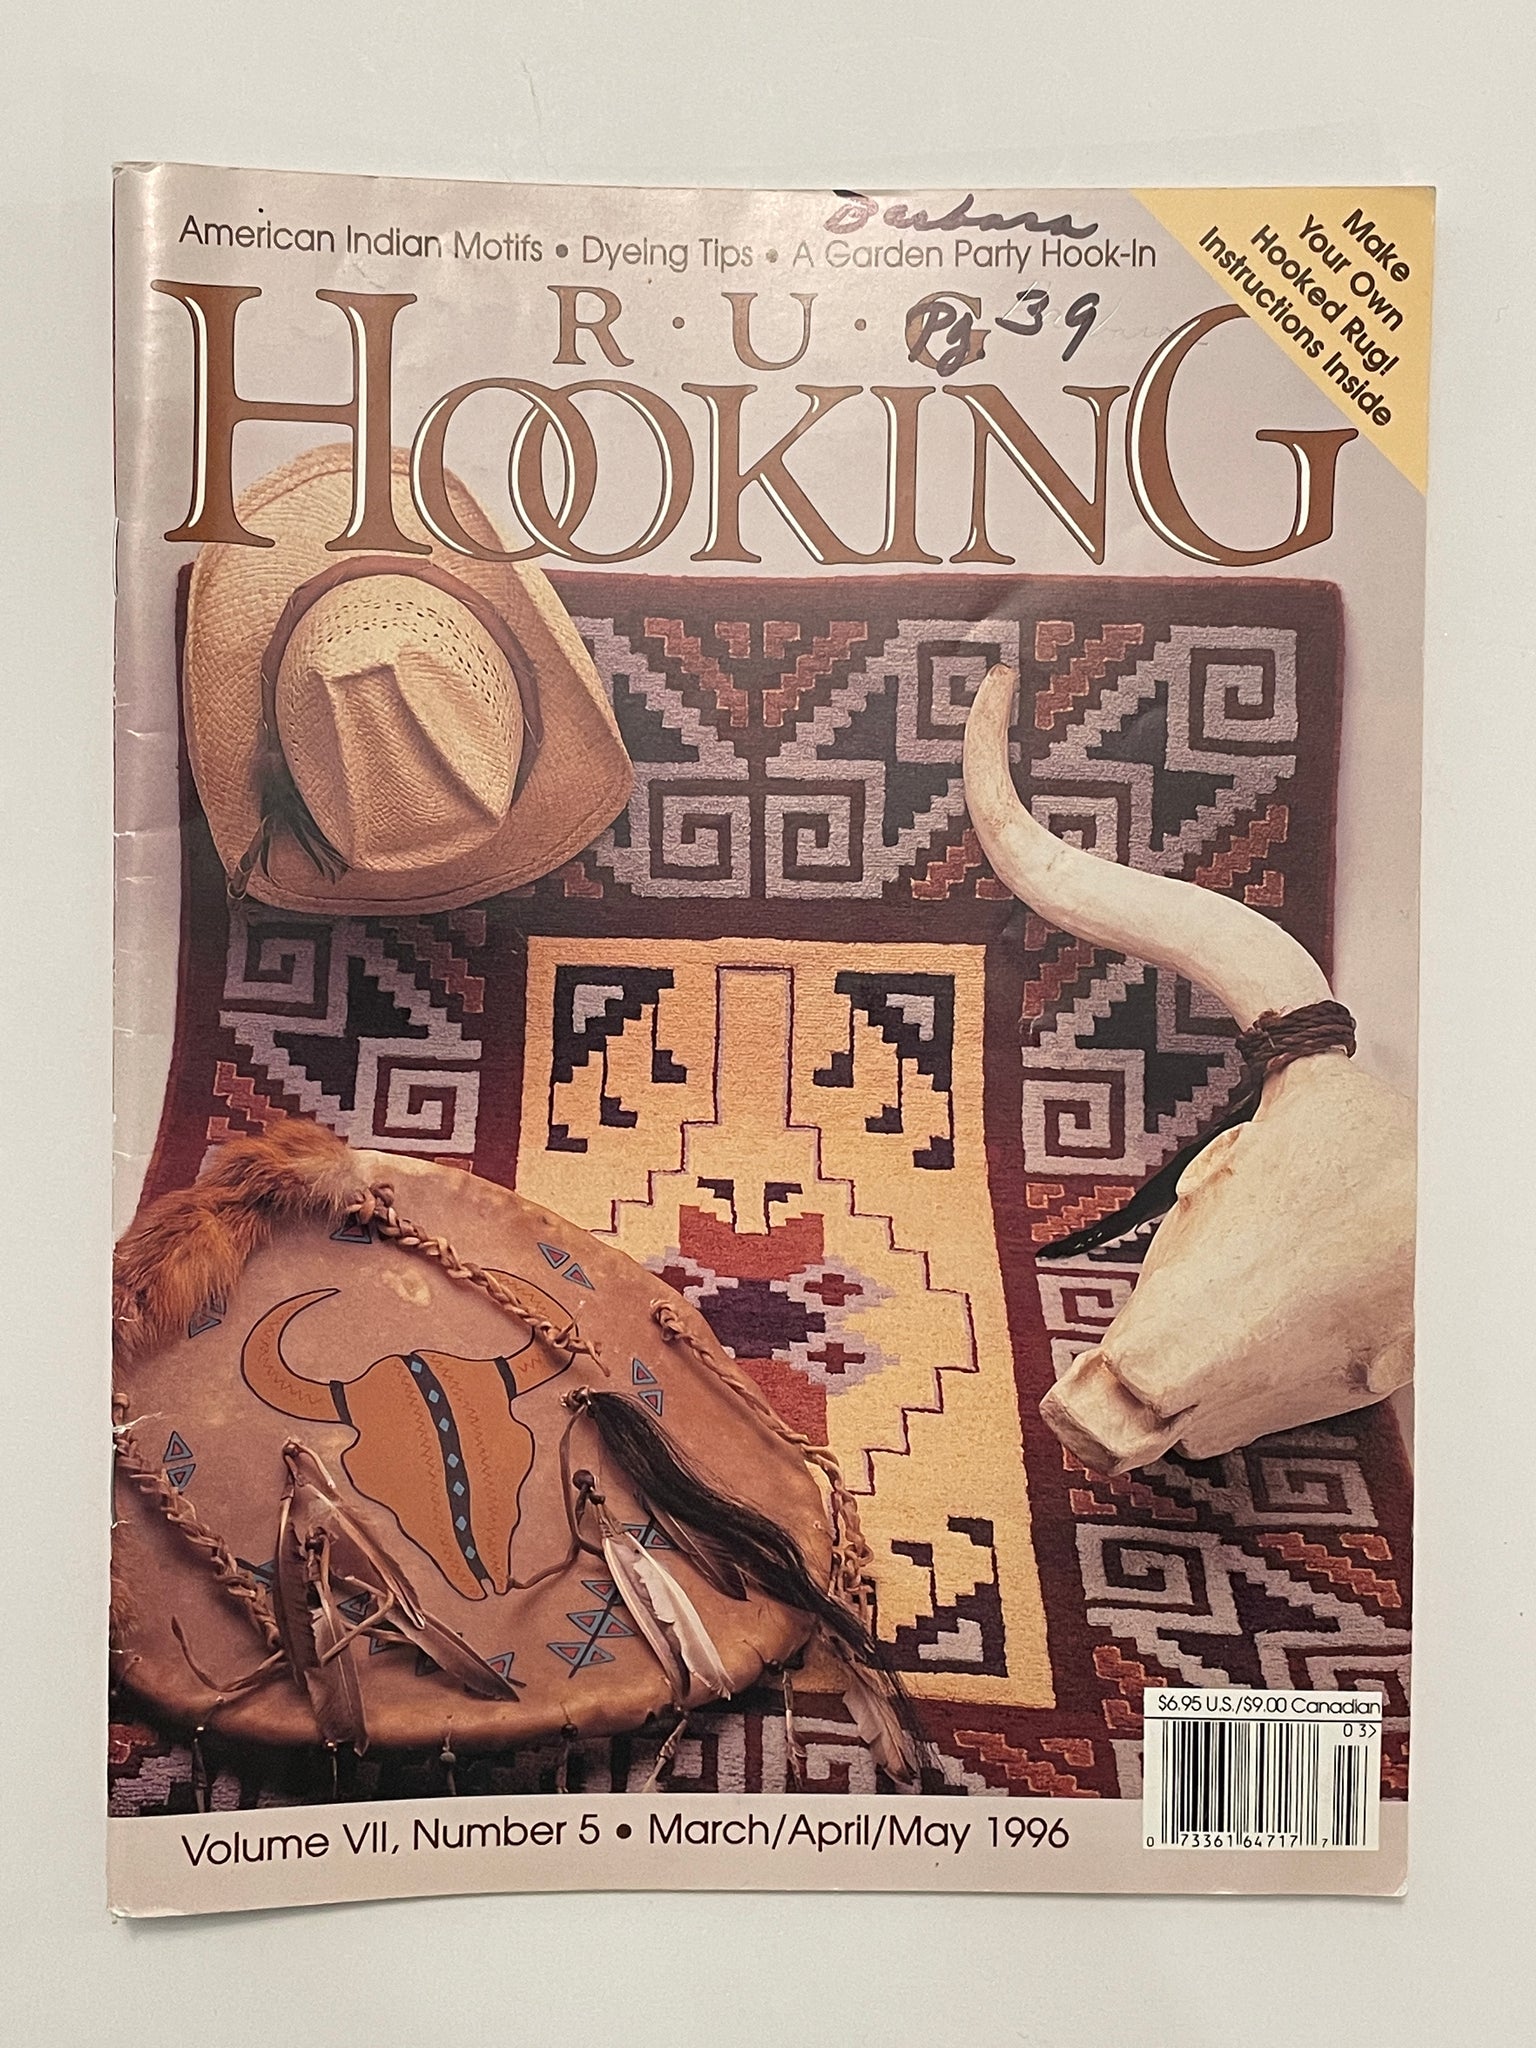 Rug Hooking Magazine: March/April/May 1996